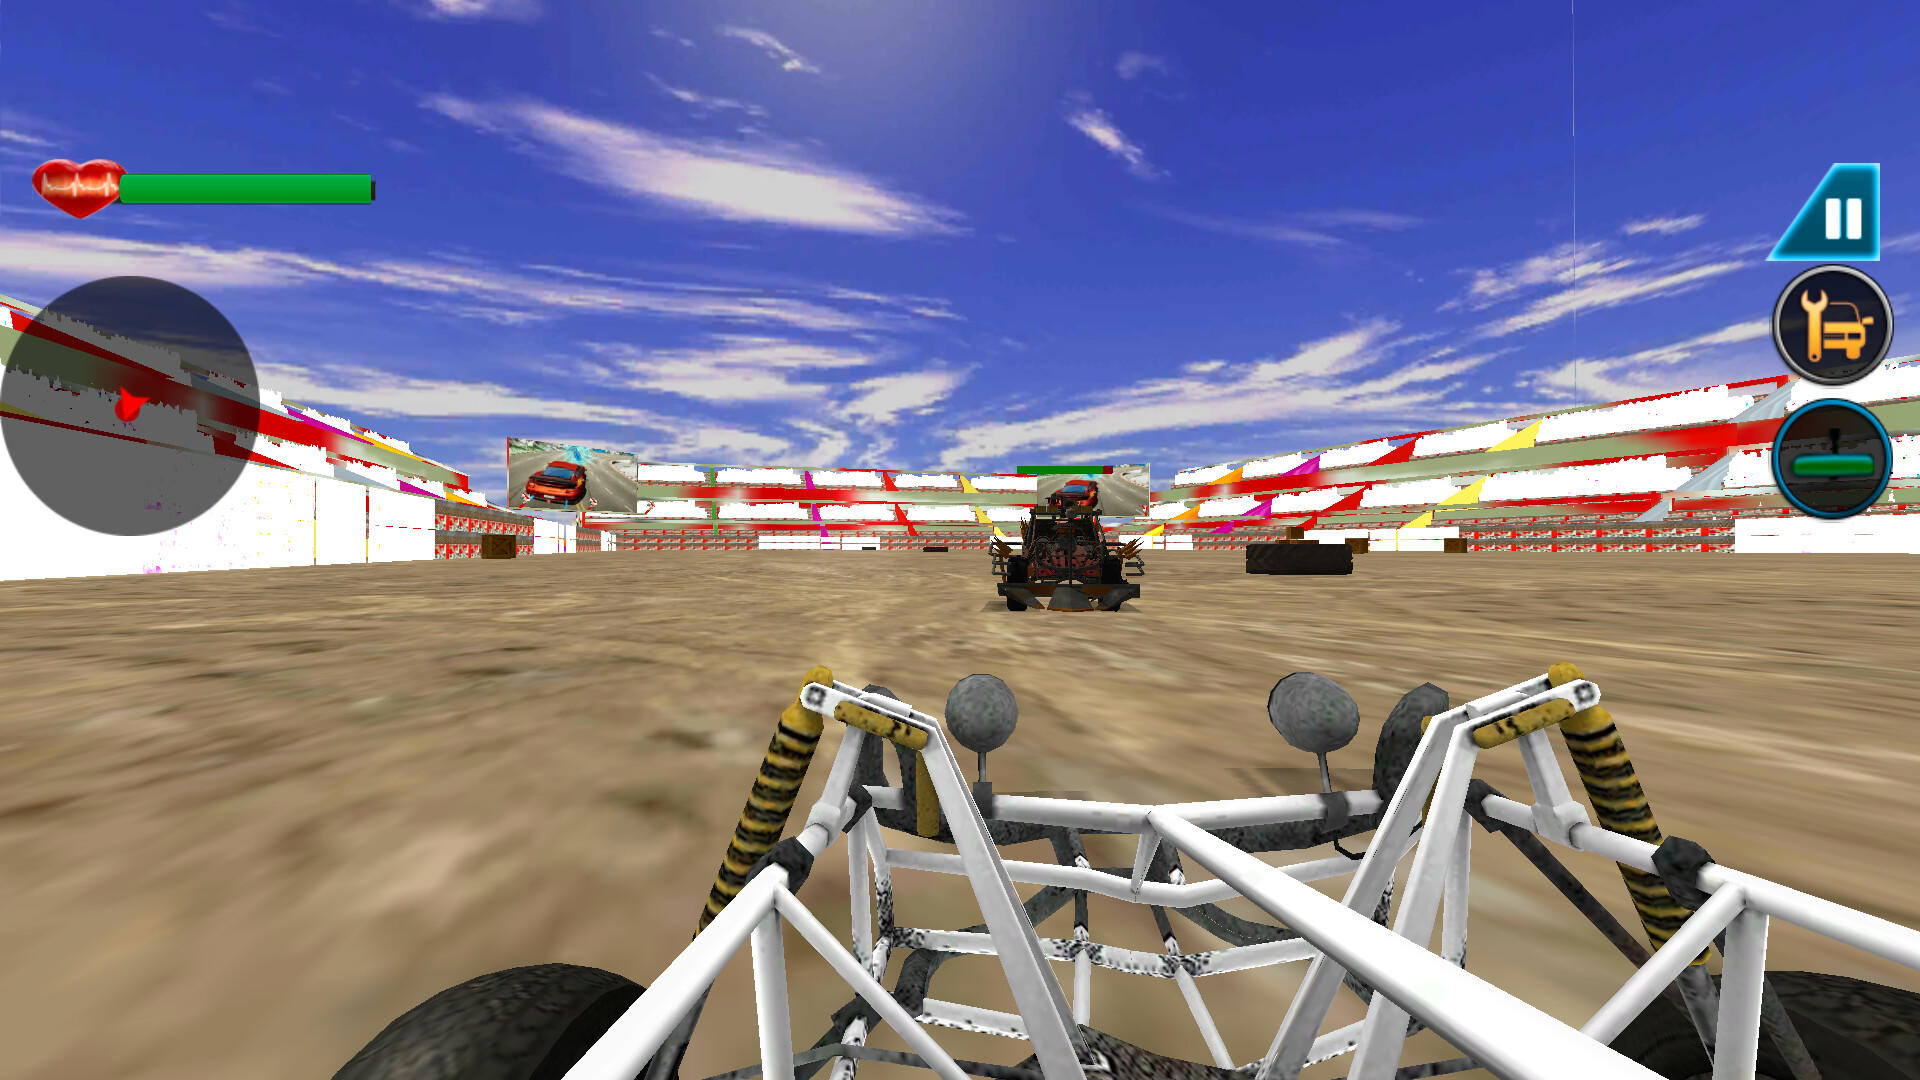 Screenshot 1 of Buggy Derby Arena 